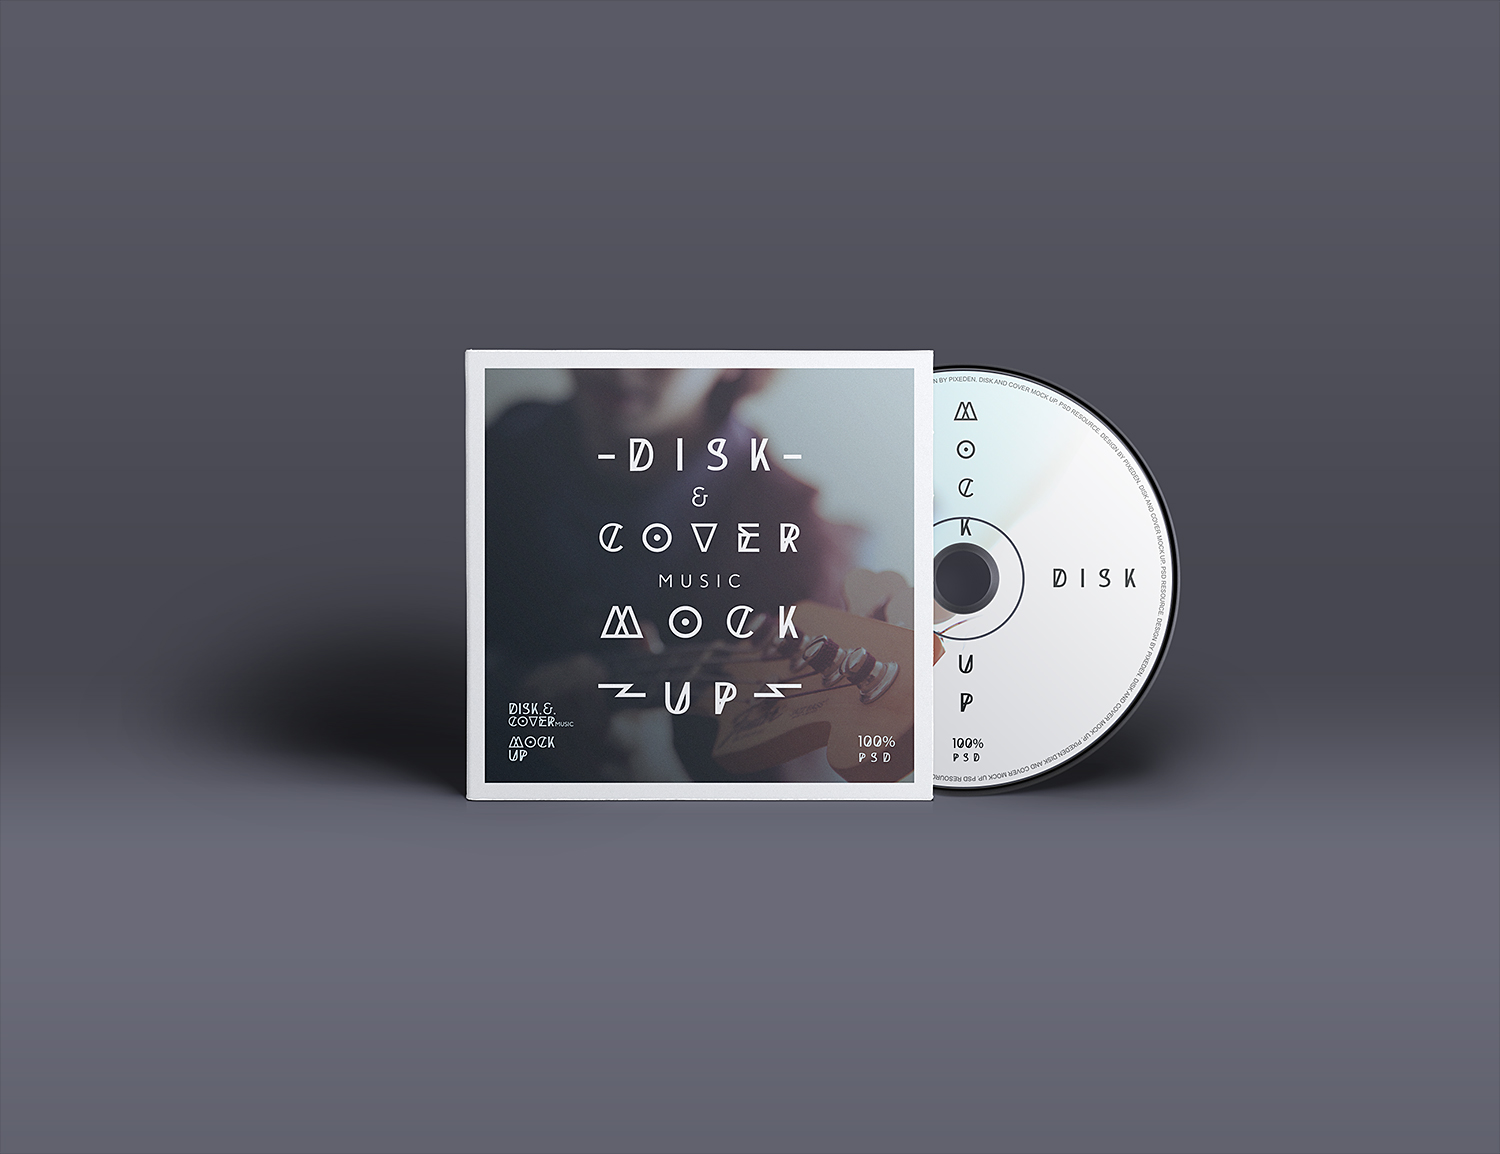 Download CD Cover PSD - Best Free Mockups